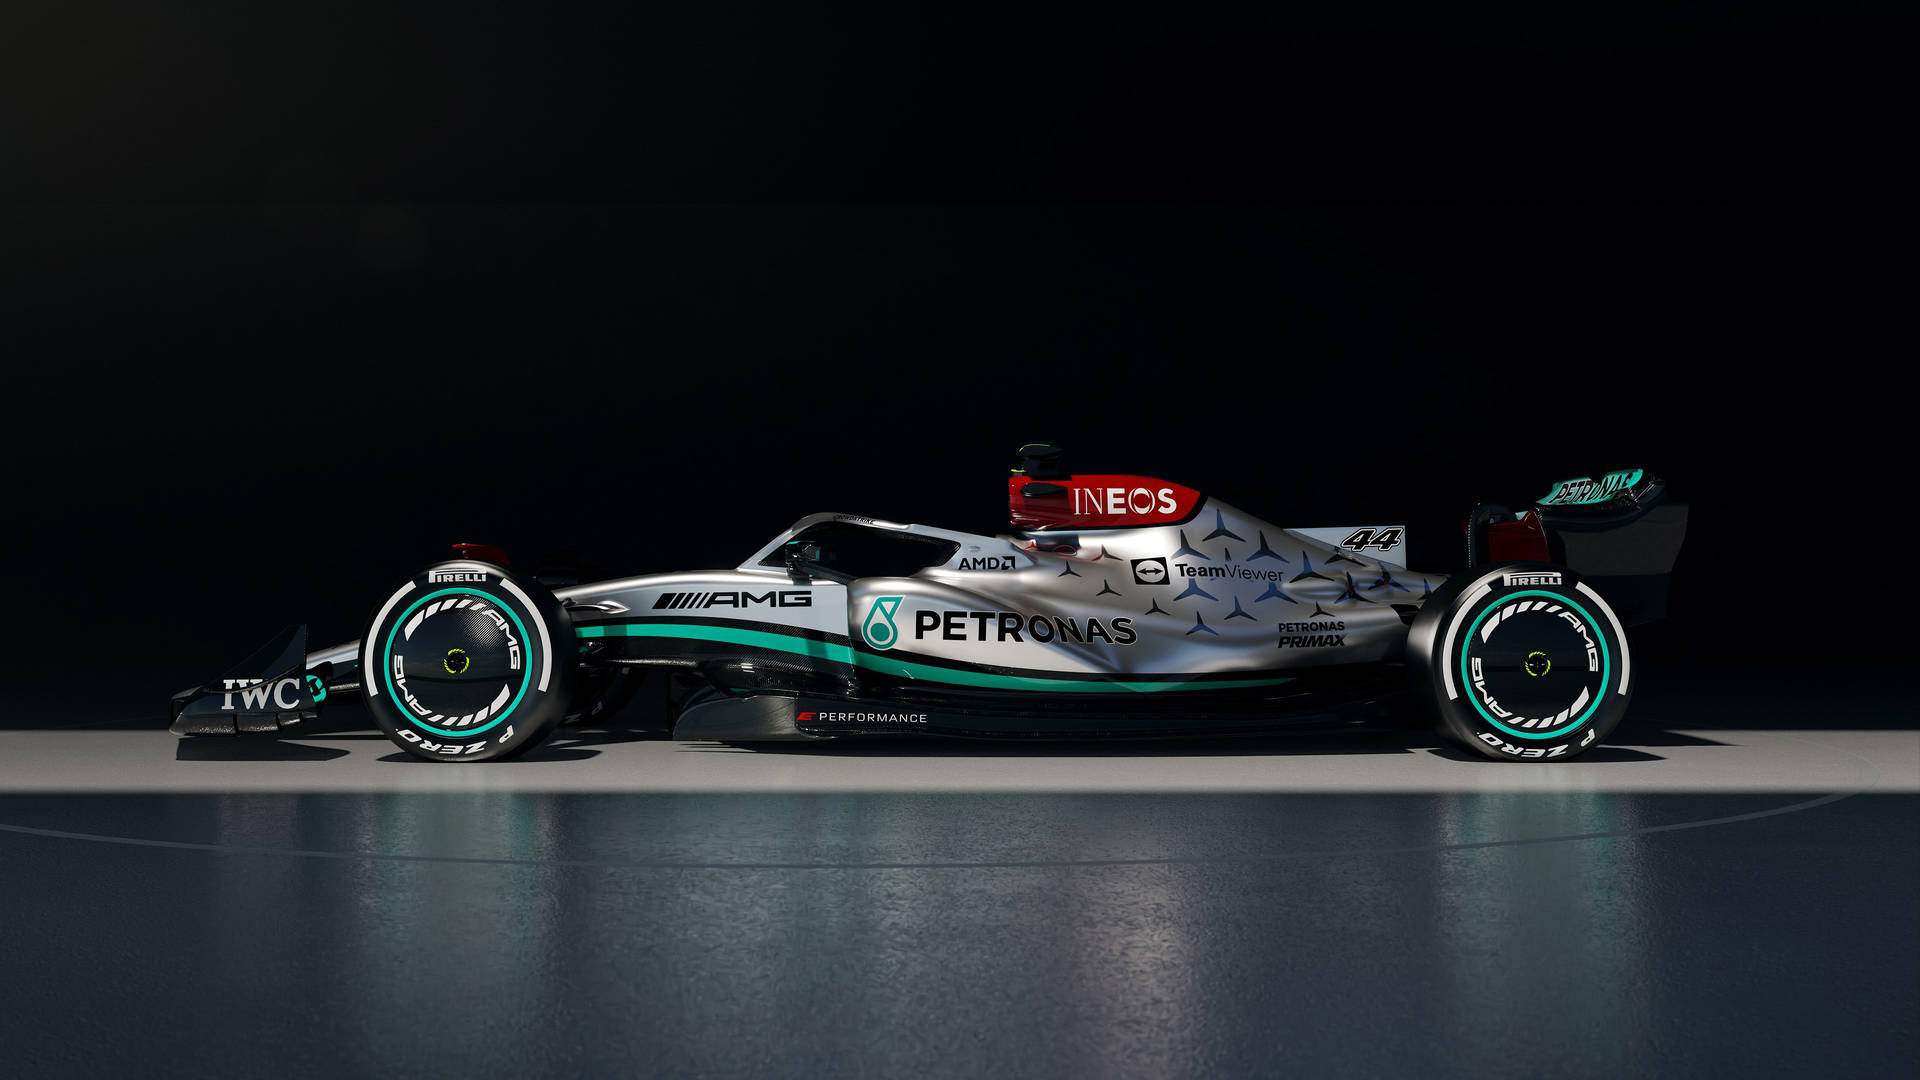 Get Ready to Feel the Thrill of the Mercedes F1 Racing with this iPhone Wallpaper